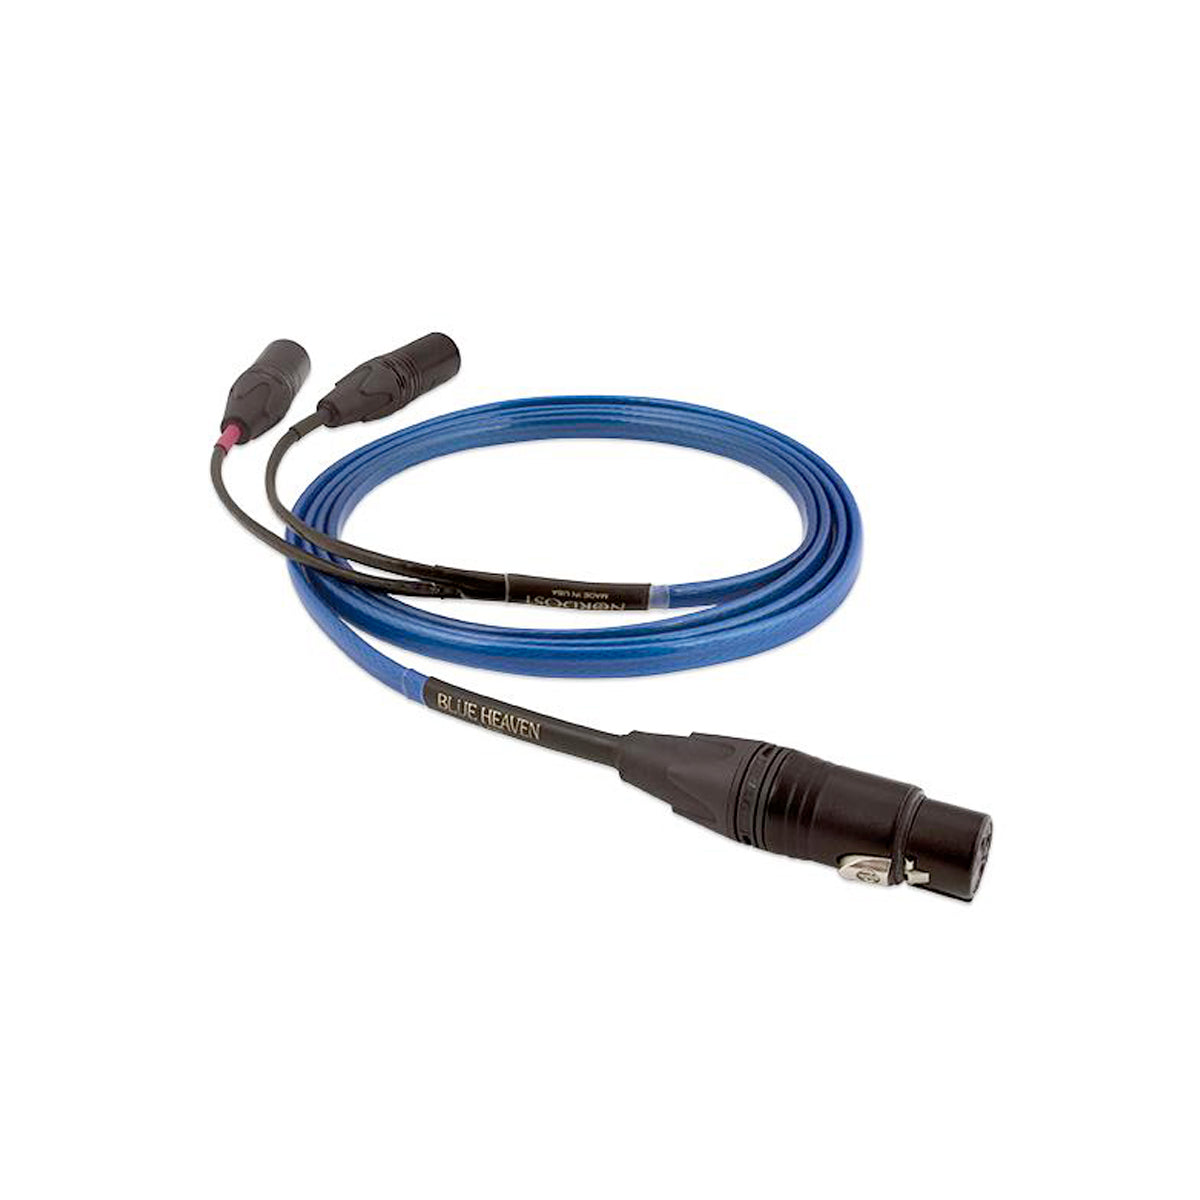 Nordost Blue Heaven Subwoofer Cable - The Audio Experts